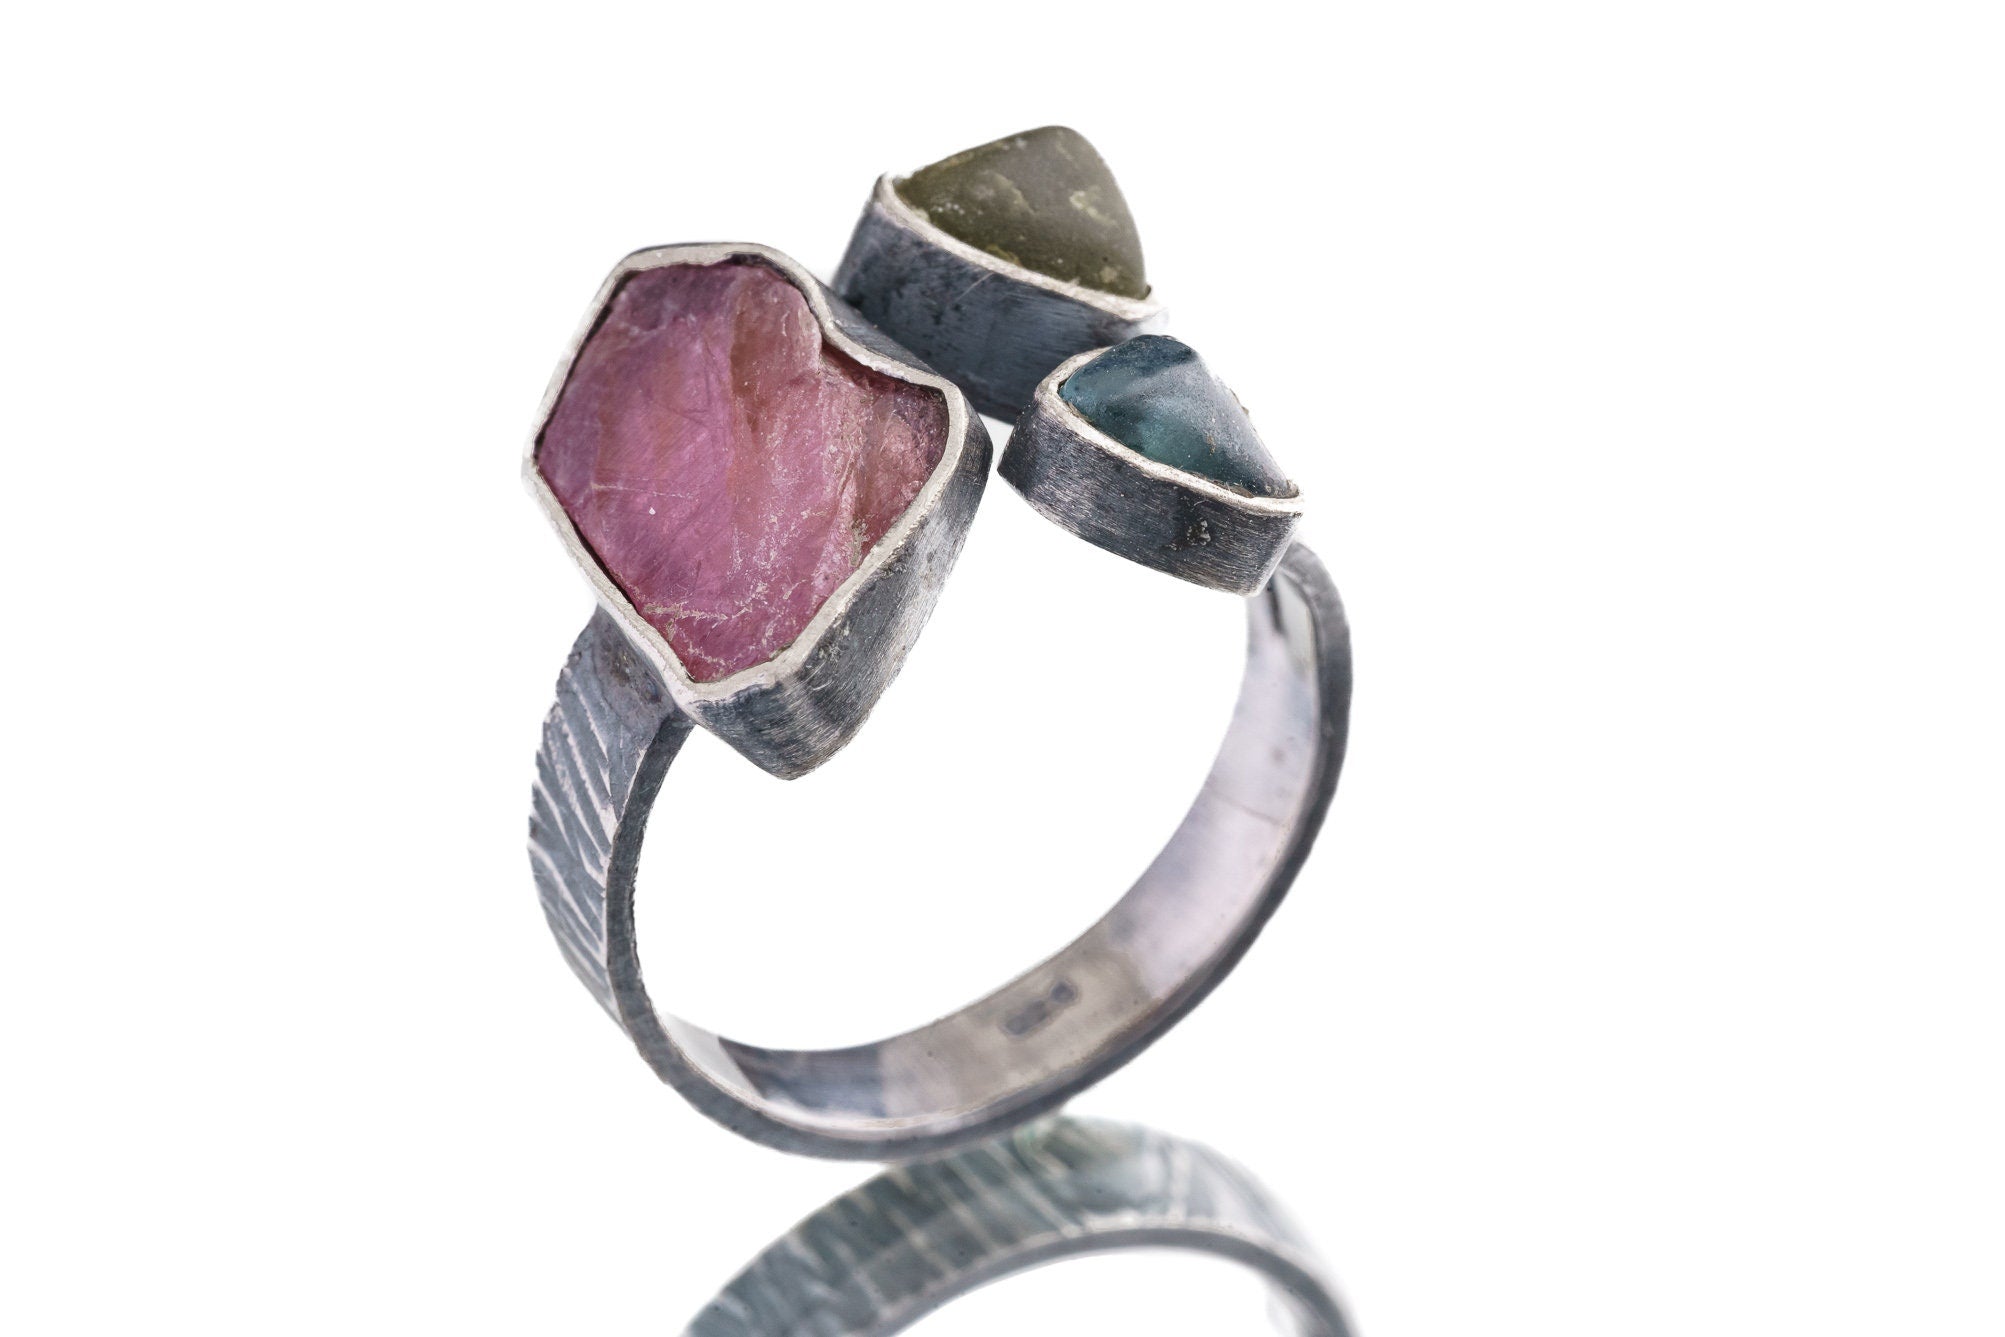 Raw Gem Ruby, Saphire & Peridot - 925 Sterling Silver - Multi Stone - Textured and oxidised - Open Ring Band - Adjustable US 6 - 10 - NO/2